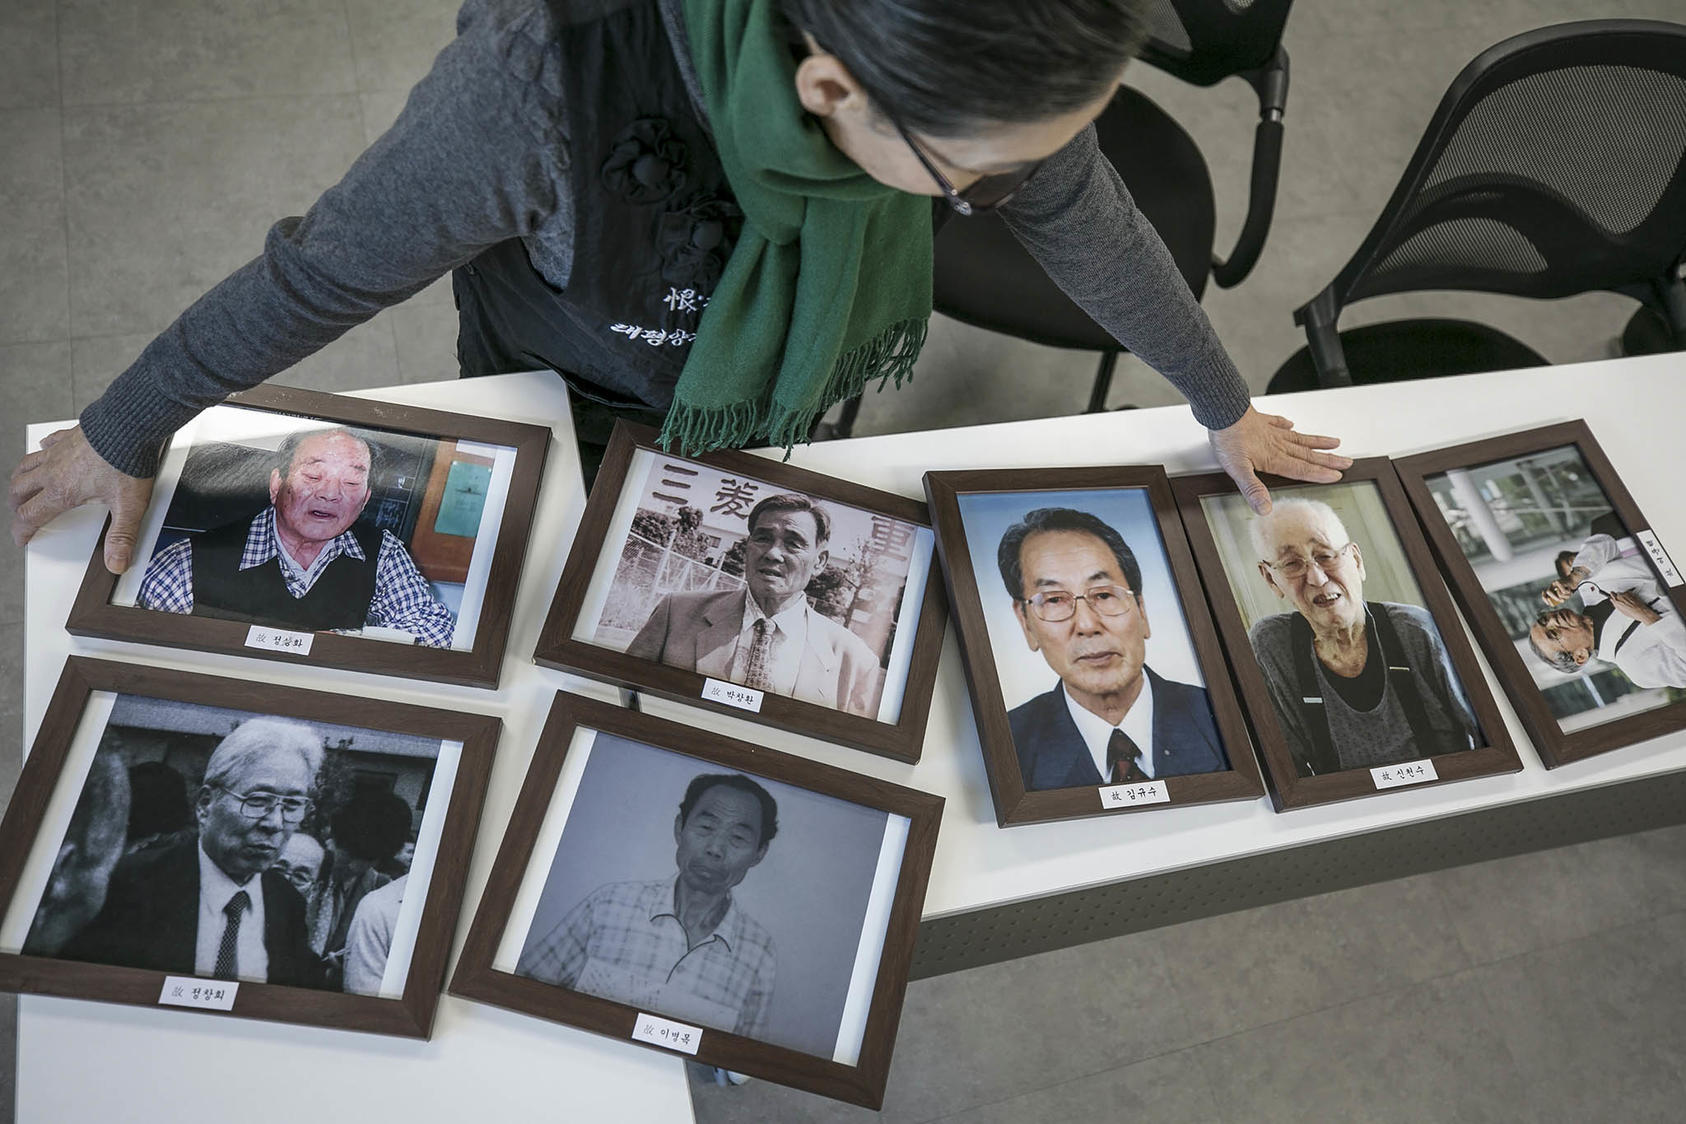 Lee Hee-ja, a South Korean activist whose father died as a forced laborer for the Japanese military, displays photos of other forced labor victims in Seoul, South Korea. December 7, 2018. (Jean Chung/The New York Times)